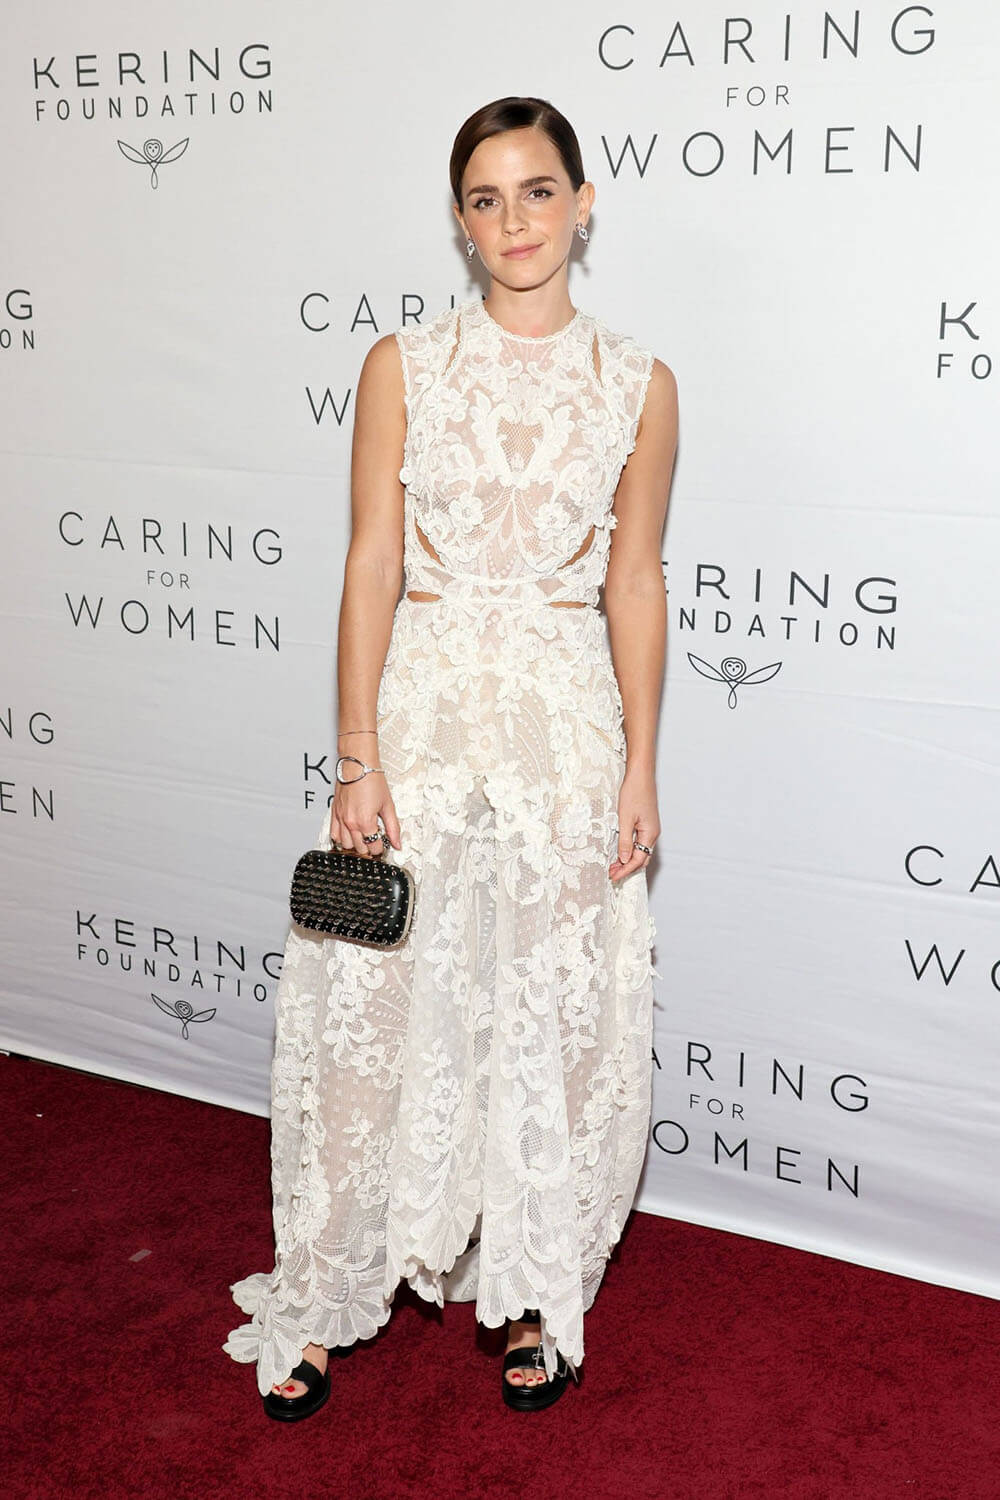 Emma Look Fabulous In Sheer White Gown